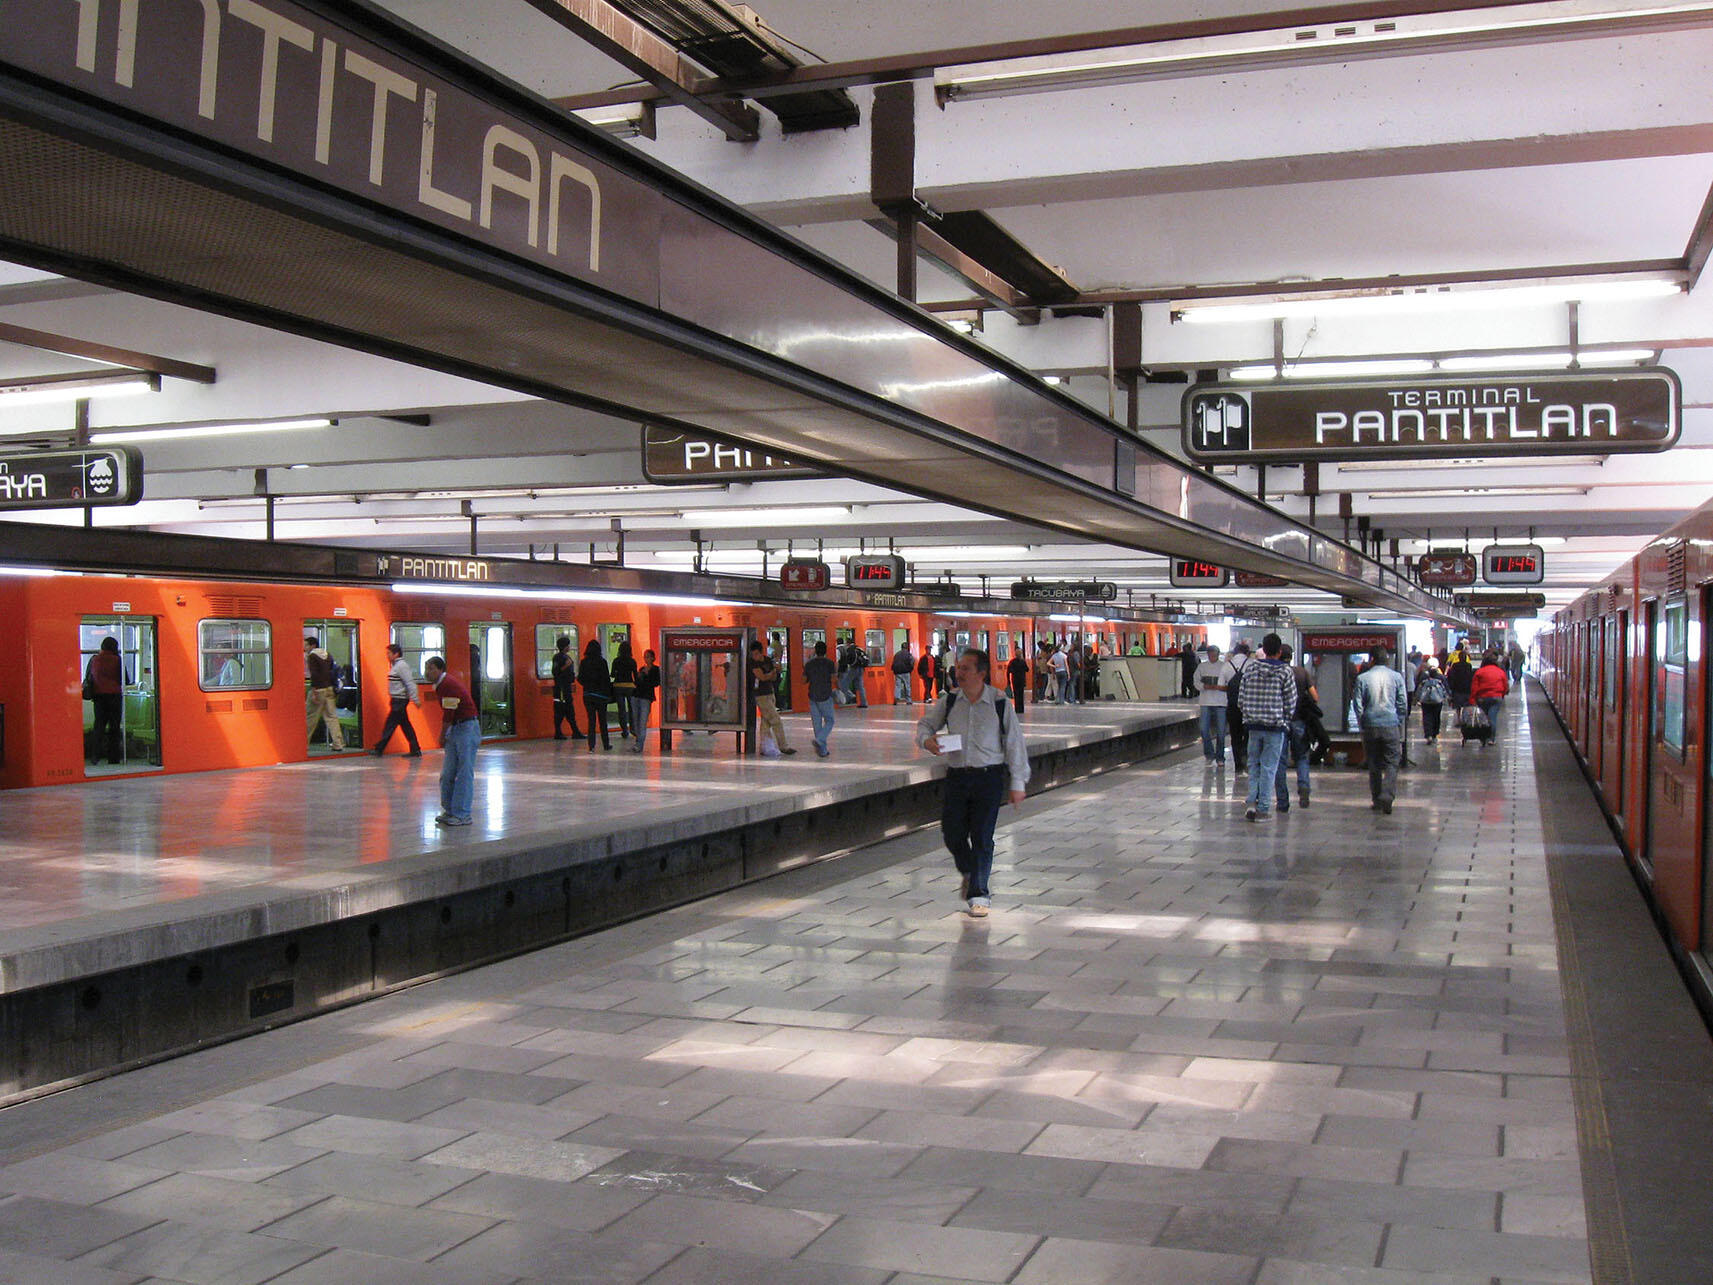 Pantitlan still exists - as a station in Mexico City’s subway system. (Photo by Jon Melnick.)